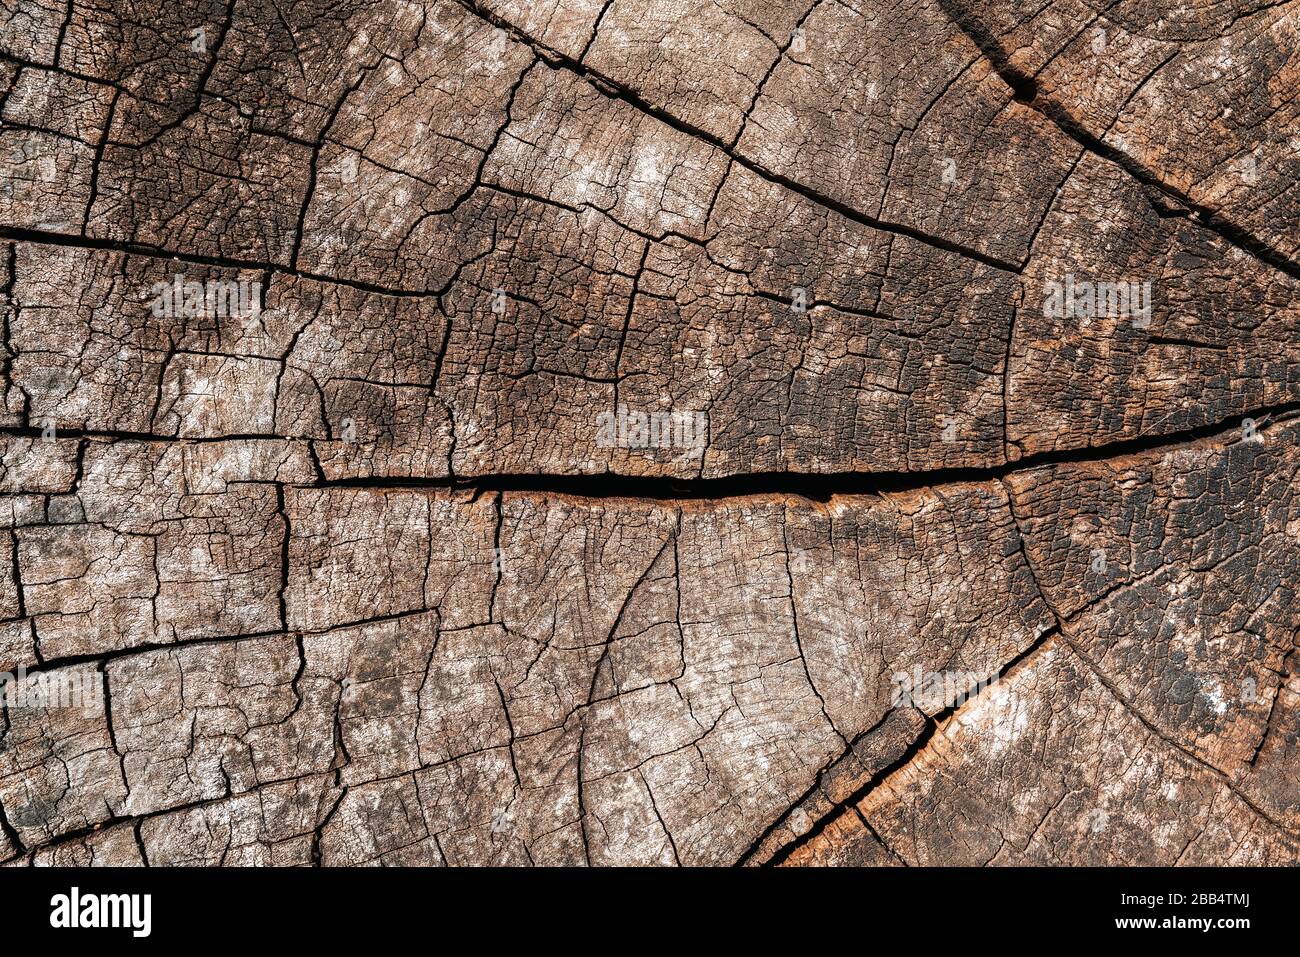 Tree stump background. Brown cracked and cut Wooden texture pattern background Stock Photo